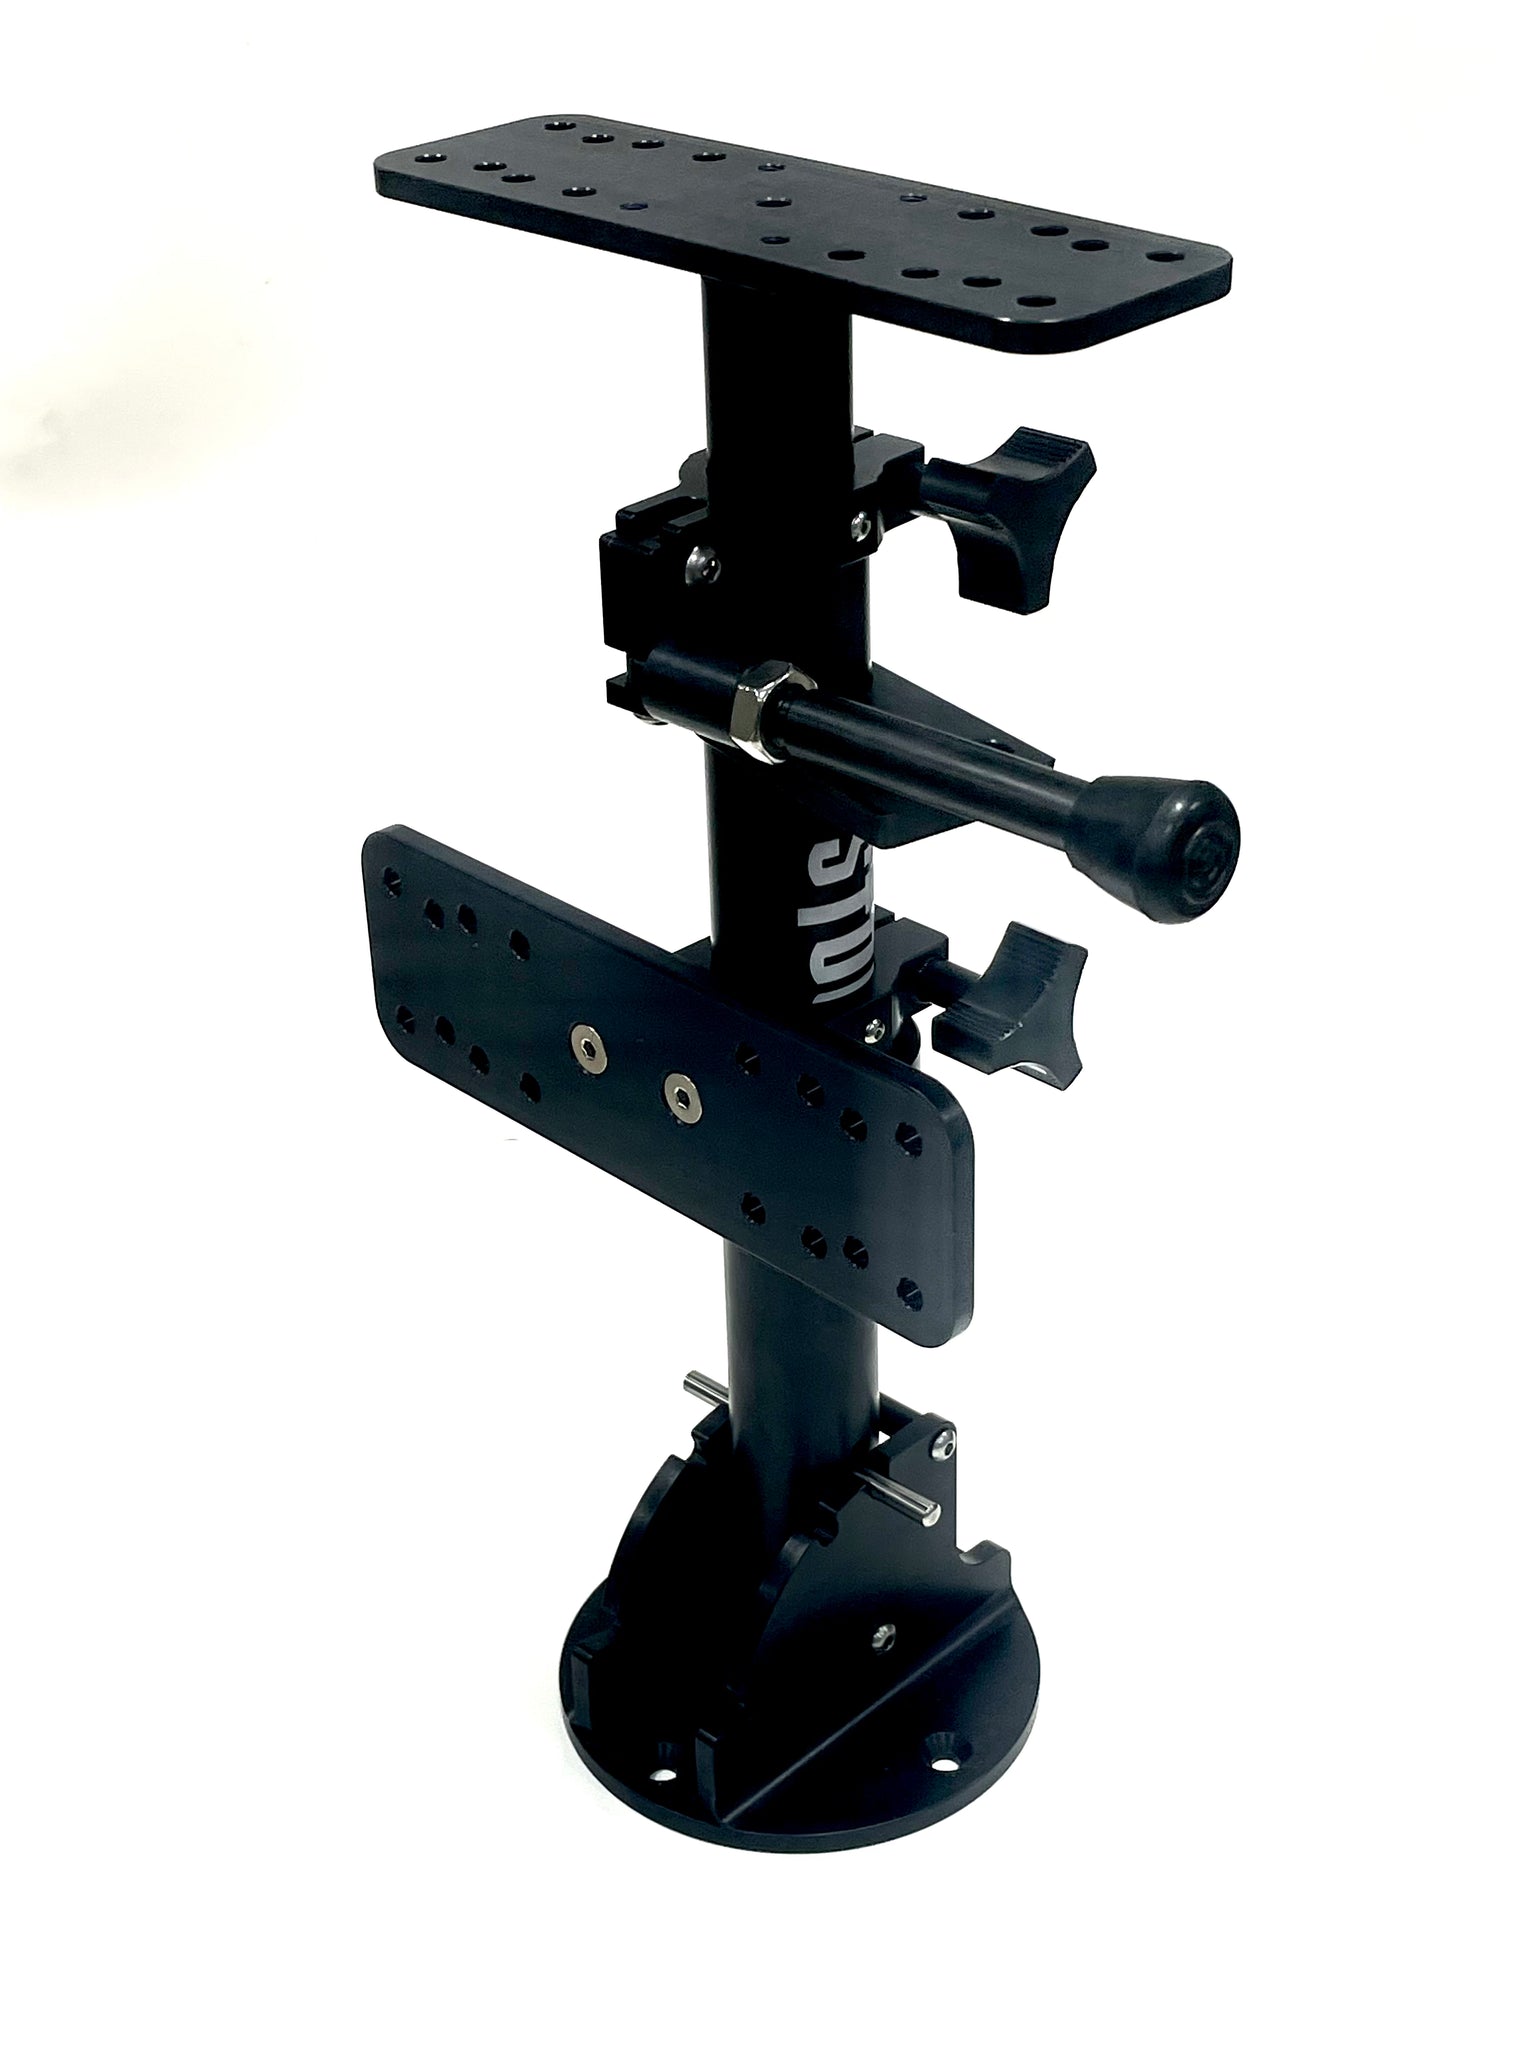 The Folding Mount  New folding double mount. Gets the units up were you  can see them and down so you can see over them. This is a new saftey  product from